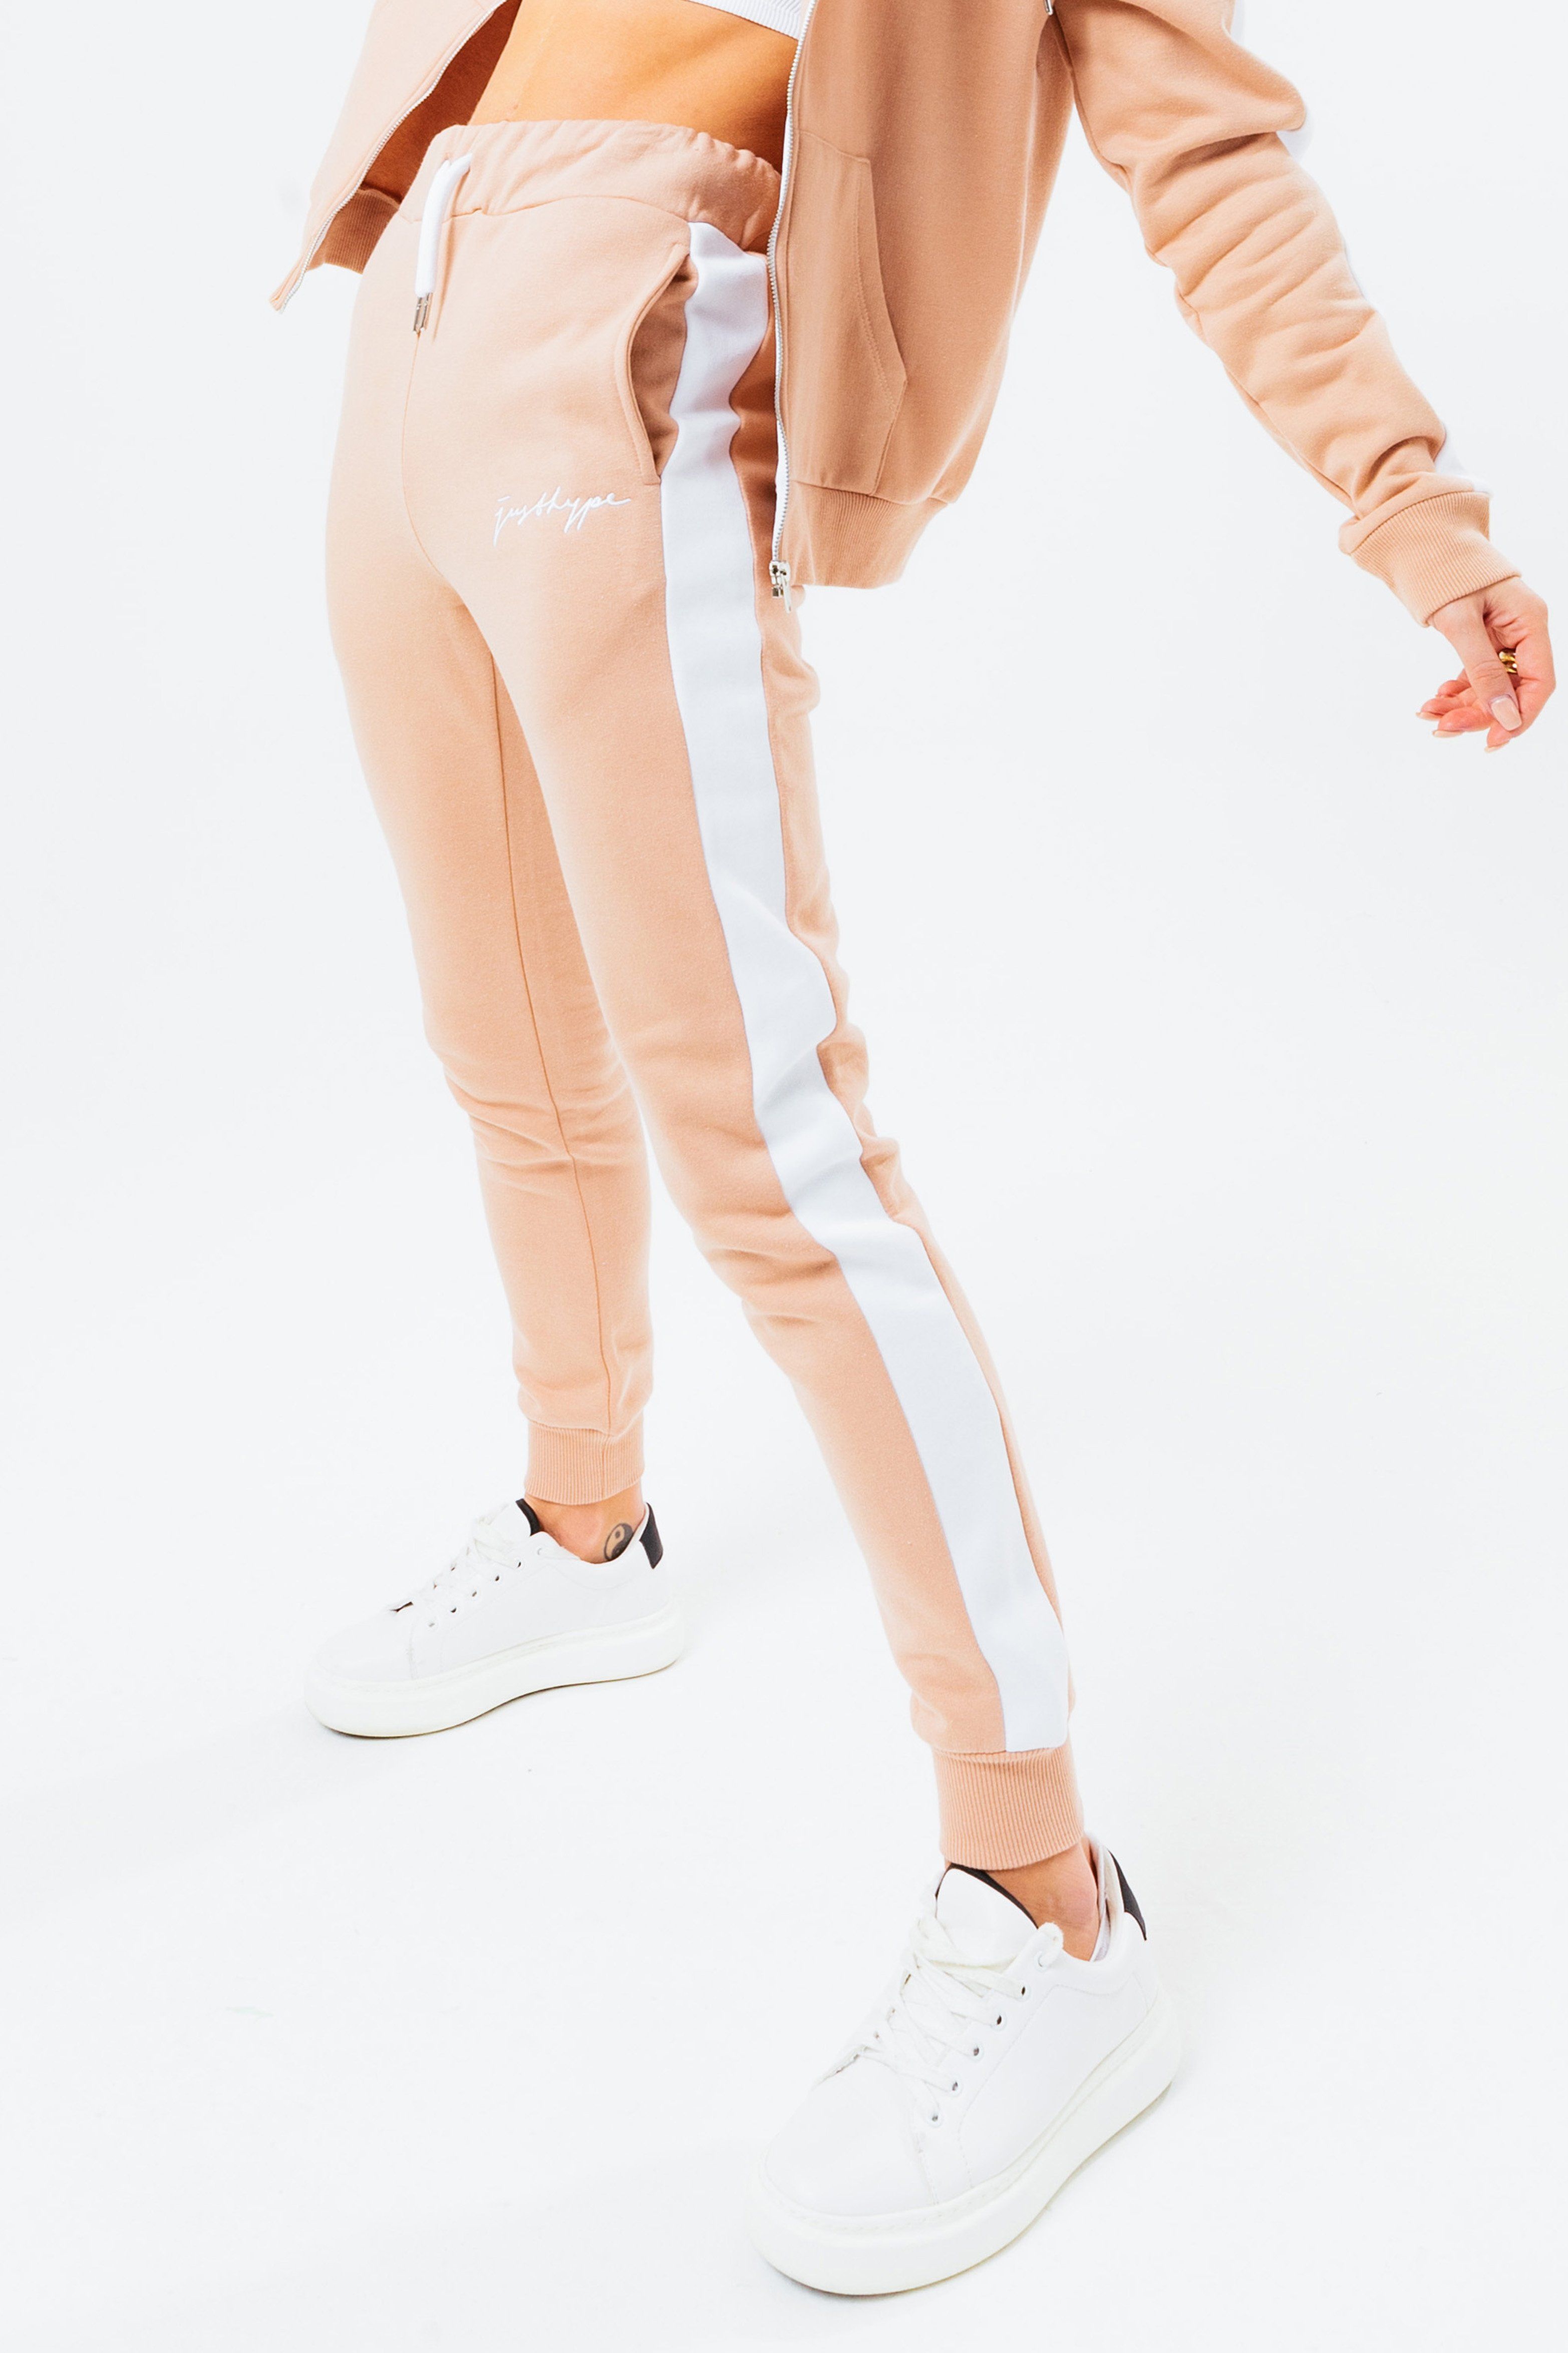 Joggers versatile for every occasion. The HYPE. Chestnut Women's Signature Joggers, available in UK size 4 up to 18, designed in 80% Cotton and 20% Polyester - the ultimate amount of comfort, room and breathable space you need. In our standard women's jogger shape, with on trend contrasting leg panelling, an elasticated waistband, fitted cuffs and drawstring pullers. Finished with the new! justhype scribble logo. Check out the matching women's hoodies and t-shirts in the scribble range, perfect to mix 'n' match your day to night looks. Machine wash at 30 degrees.